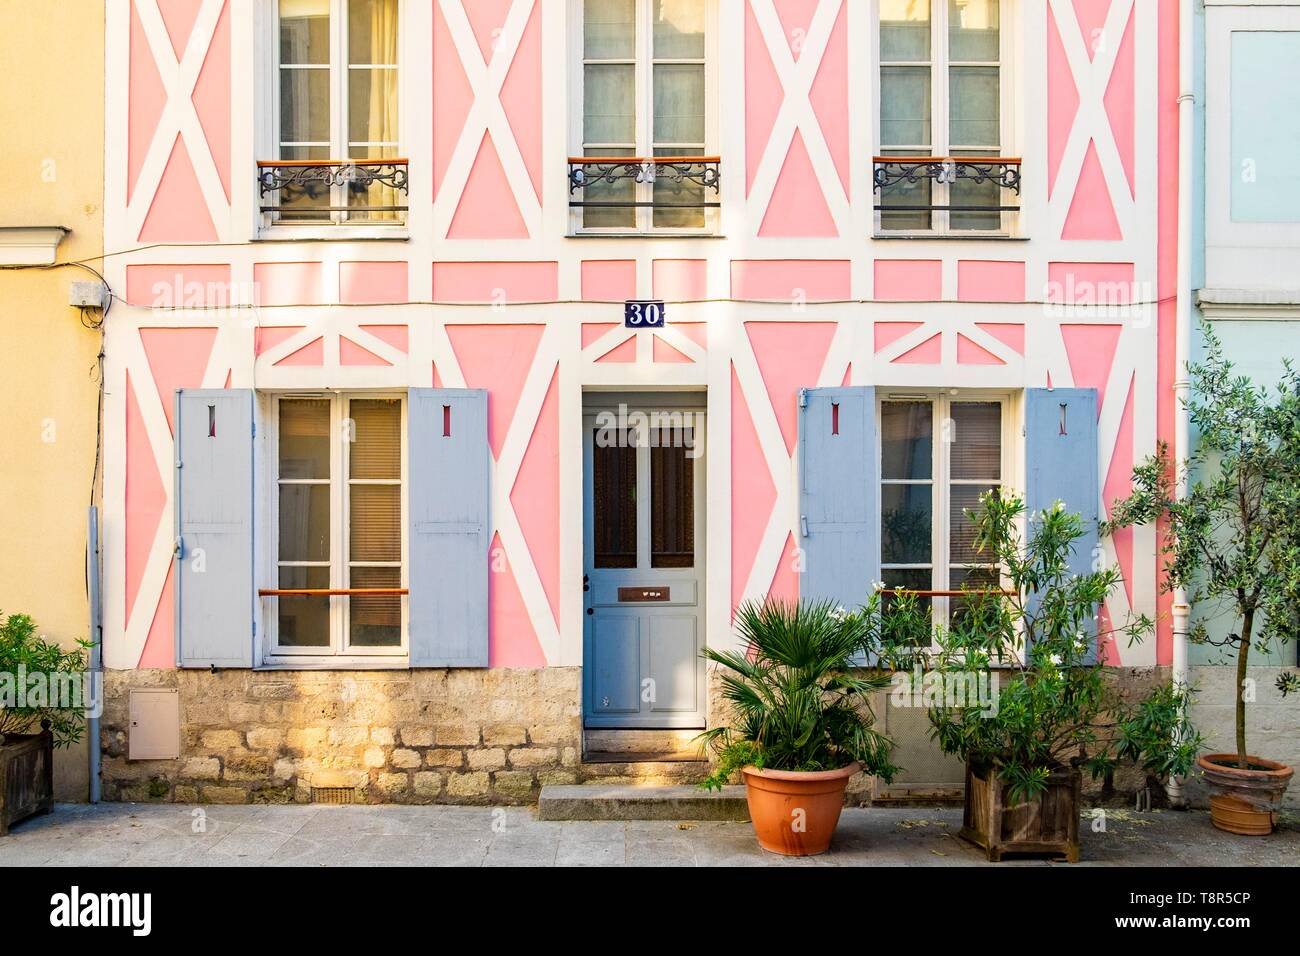 France, Paris, district of Quinze Vingts, rue Cremieux is a pedestrian and paved street, lined with small pavilions with colorful facades Stock Photo